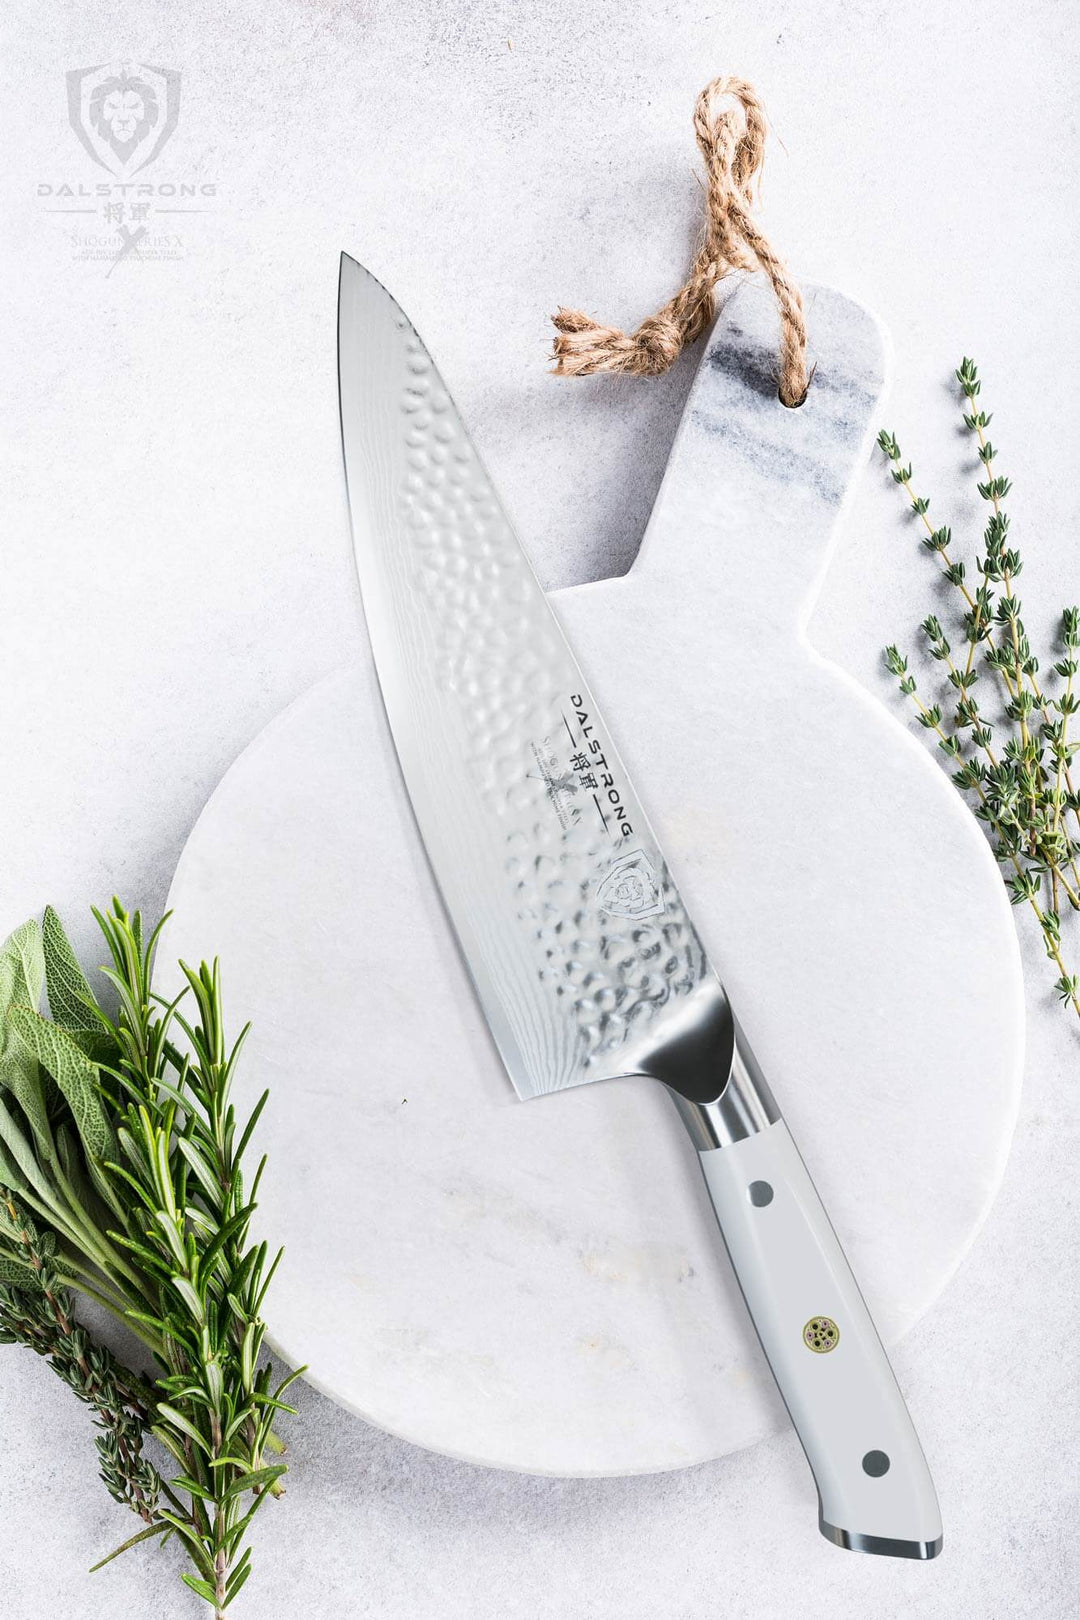 Dalstrong shogun series 8 inch chef knife with white handle on a white wooden board with green herbs beside it.